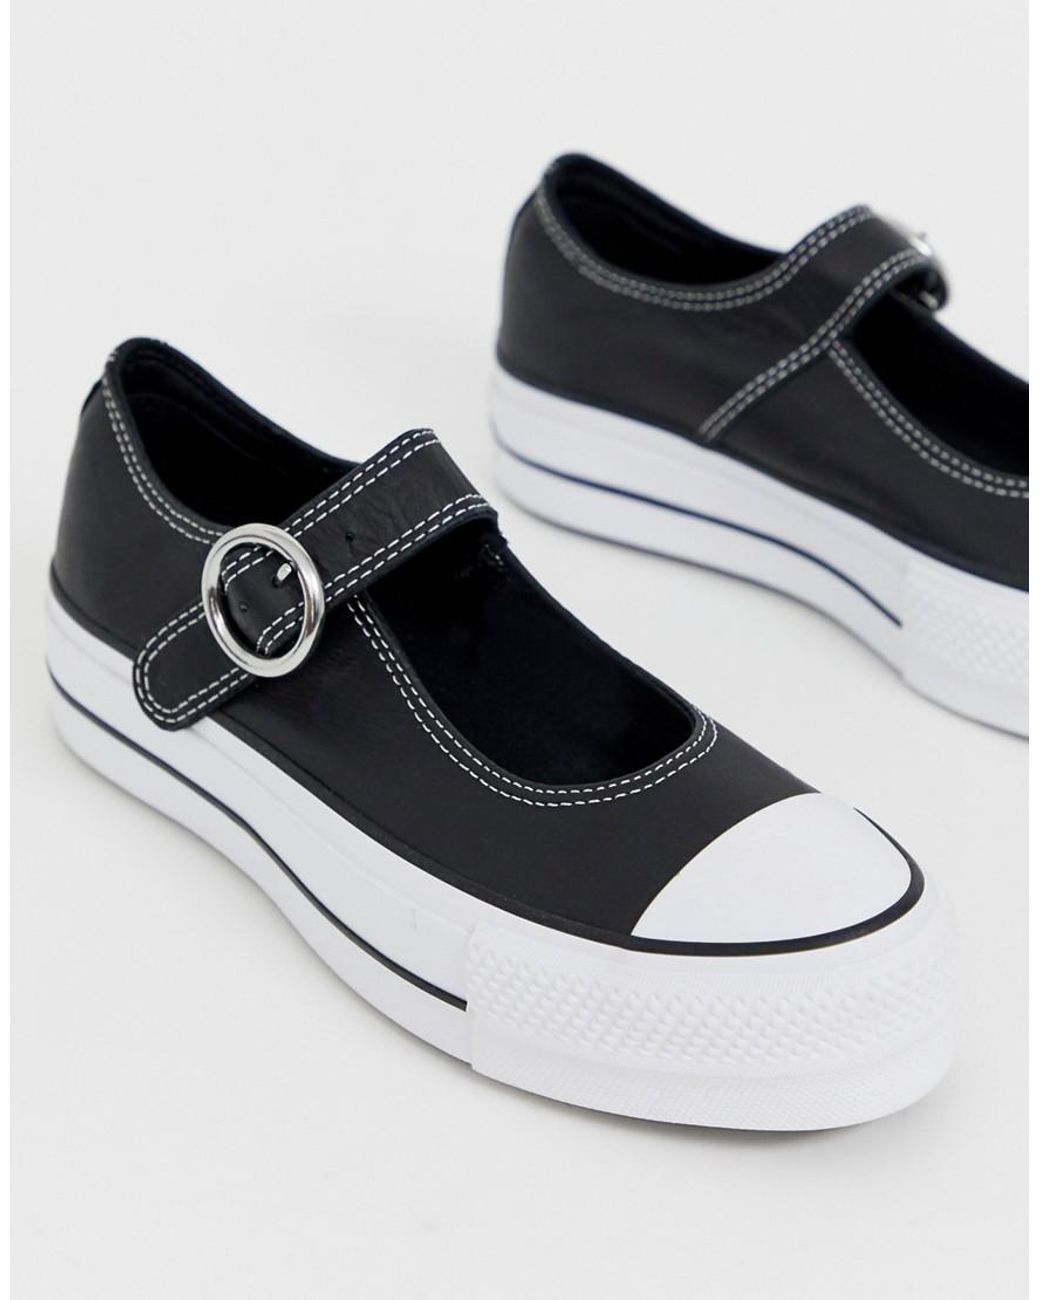 Converse Chuck Taylor Mary Jane Black Shoes | Lyst